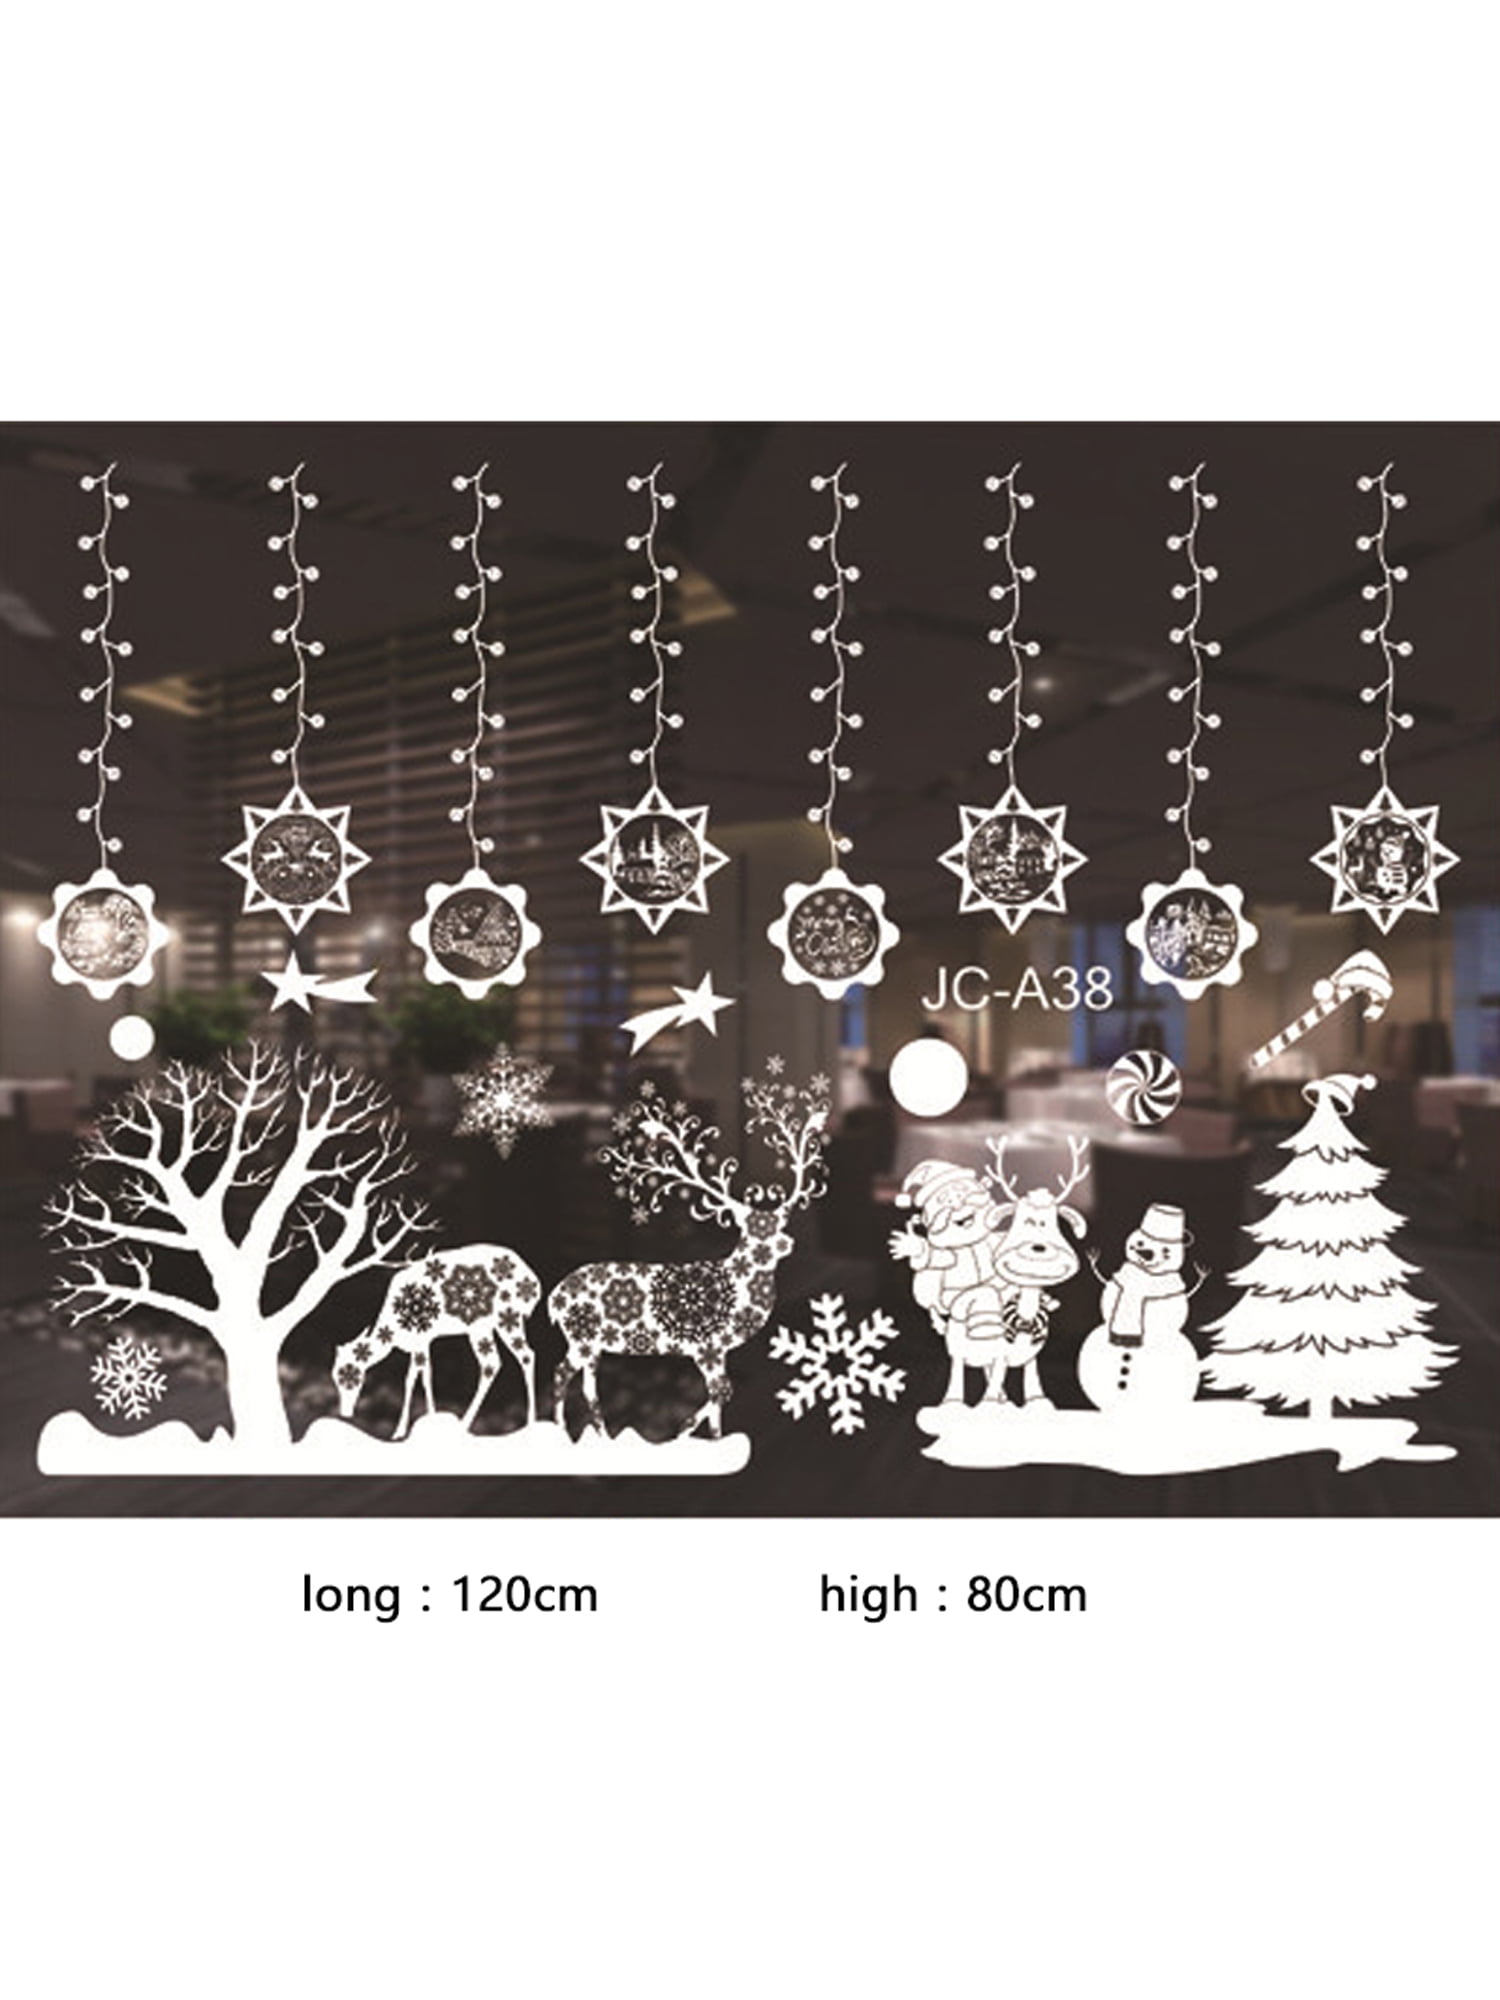 Amurgo 10 Sheets Removable Christmas Window Clings Xmas Decorations Santa Snowman Elk Glass Stickers Party Supplies